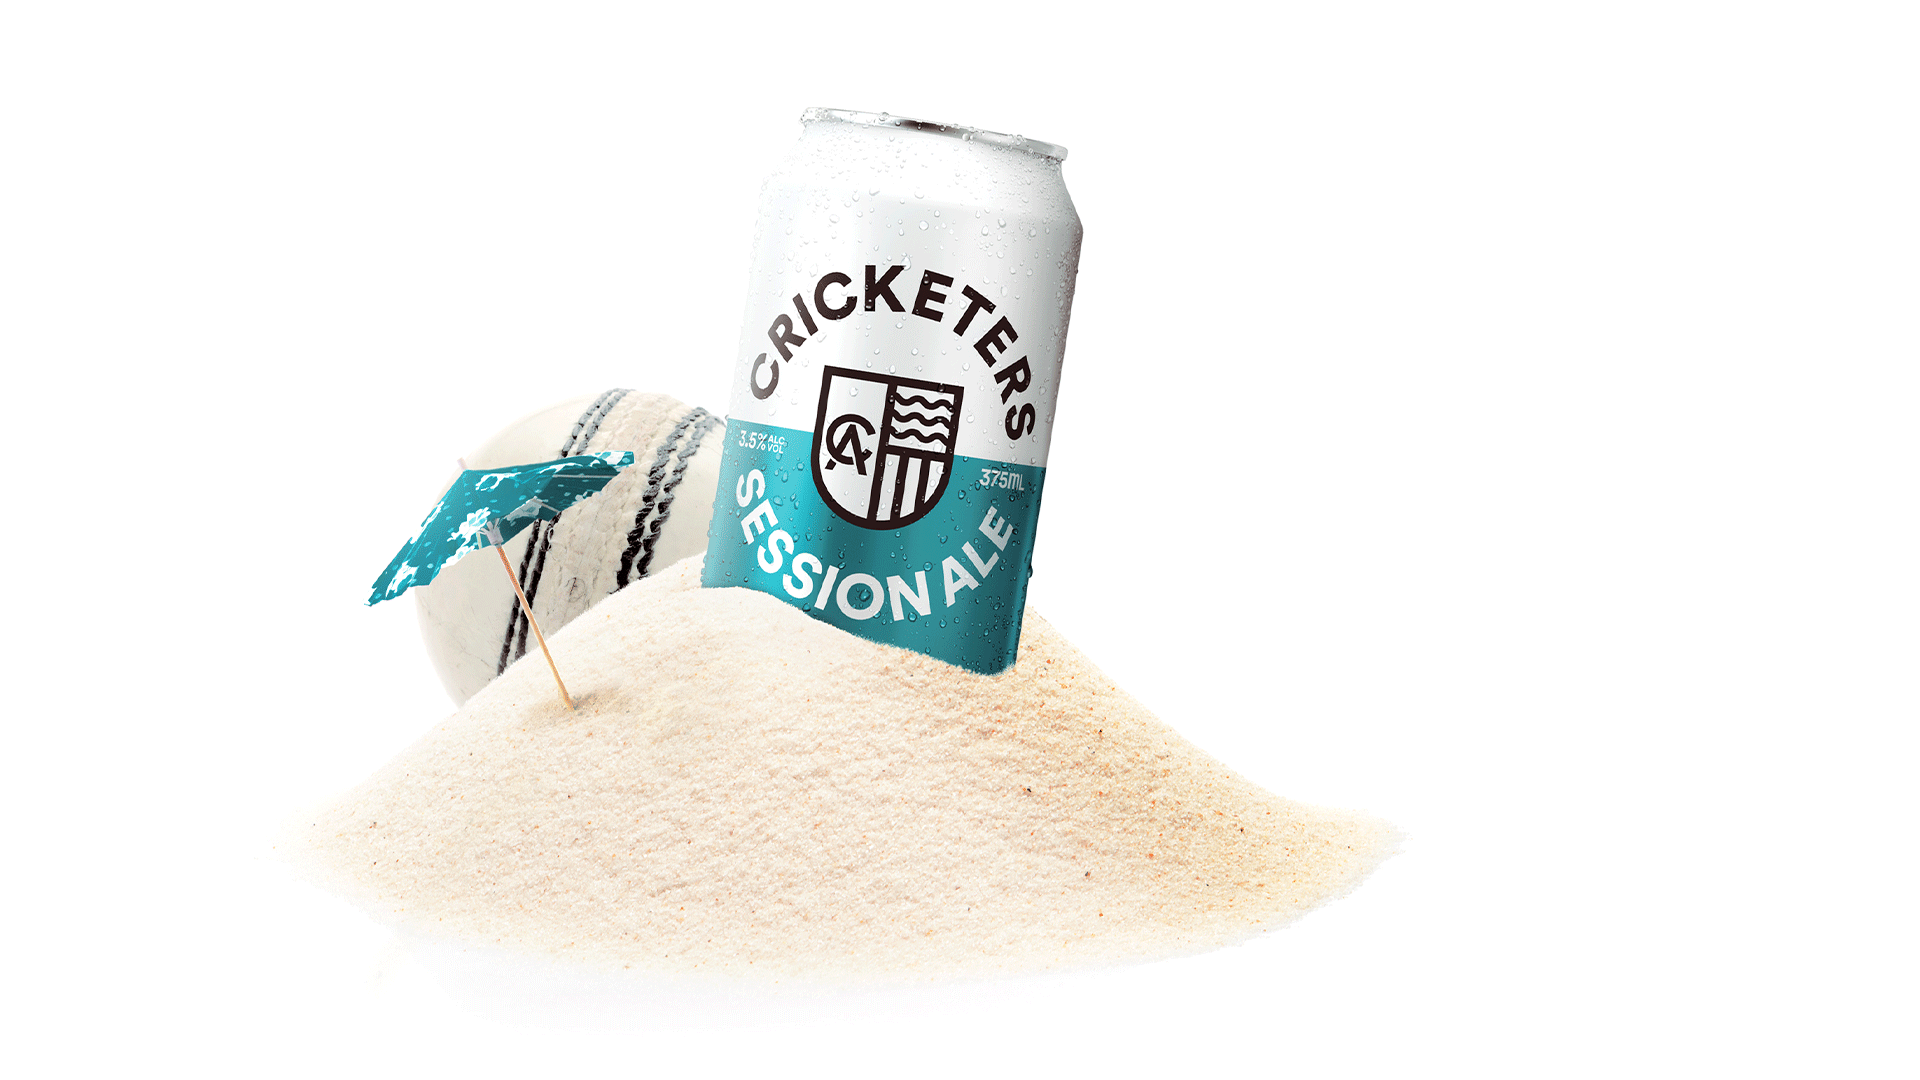 Cricketers Session Ale can in a sand pile, next to a cricket call and cocktail umbrella.